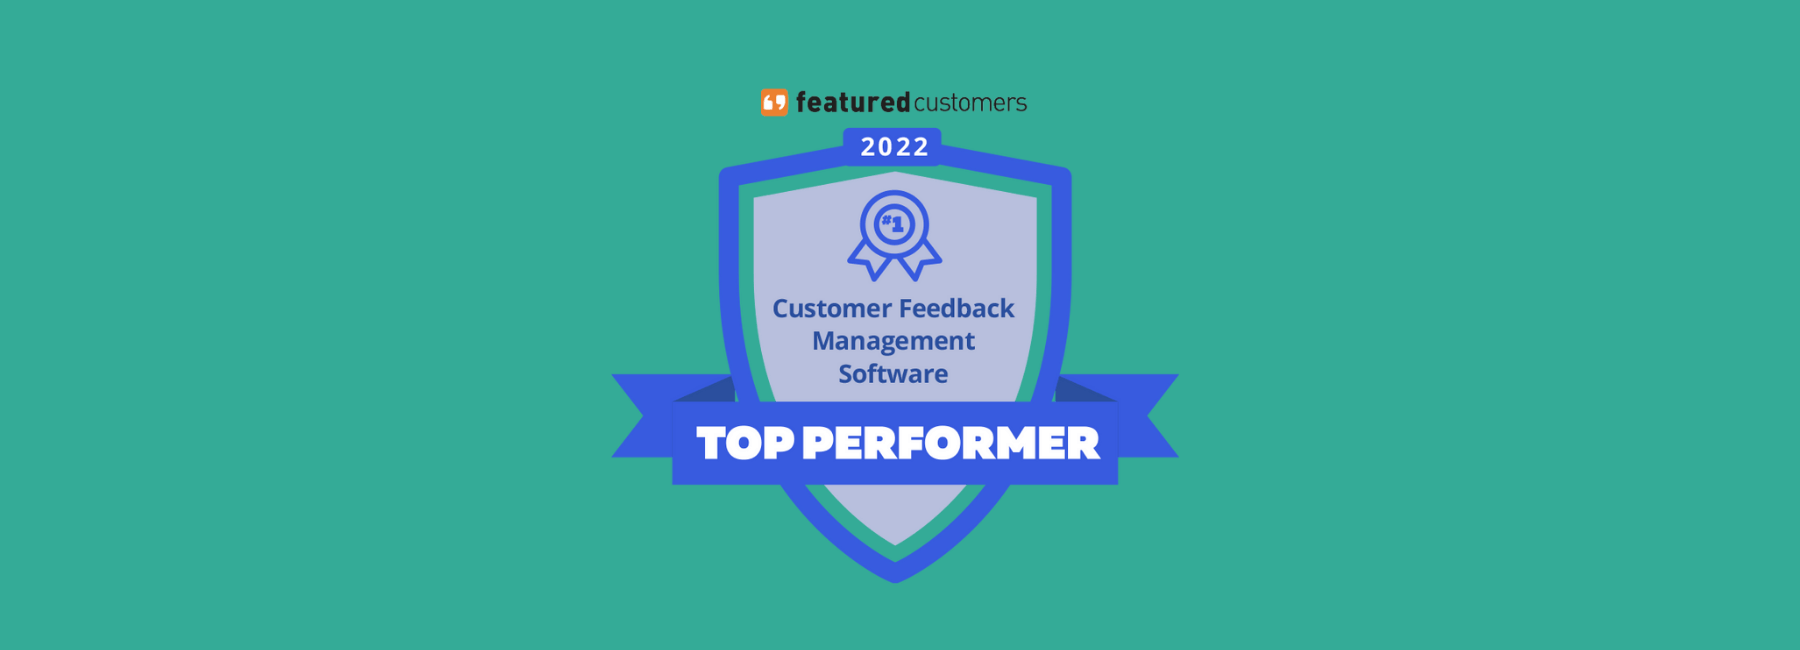 Mopinion named Top Performer in Customer Feedback Management Software